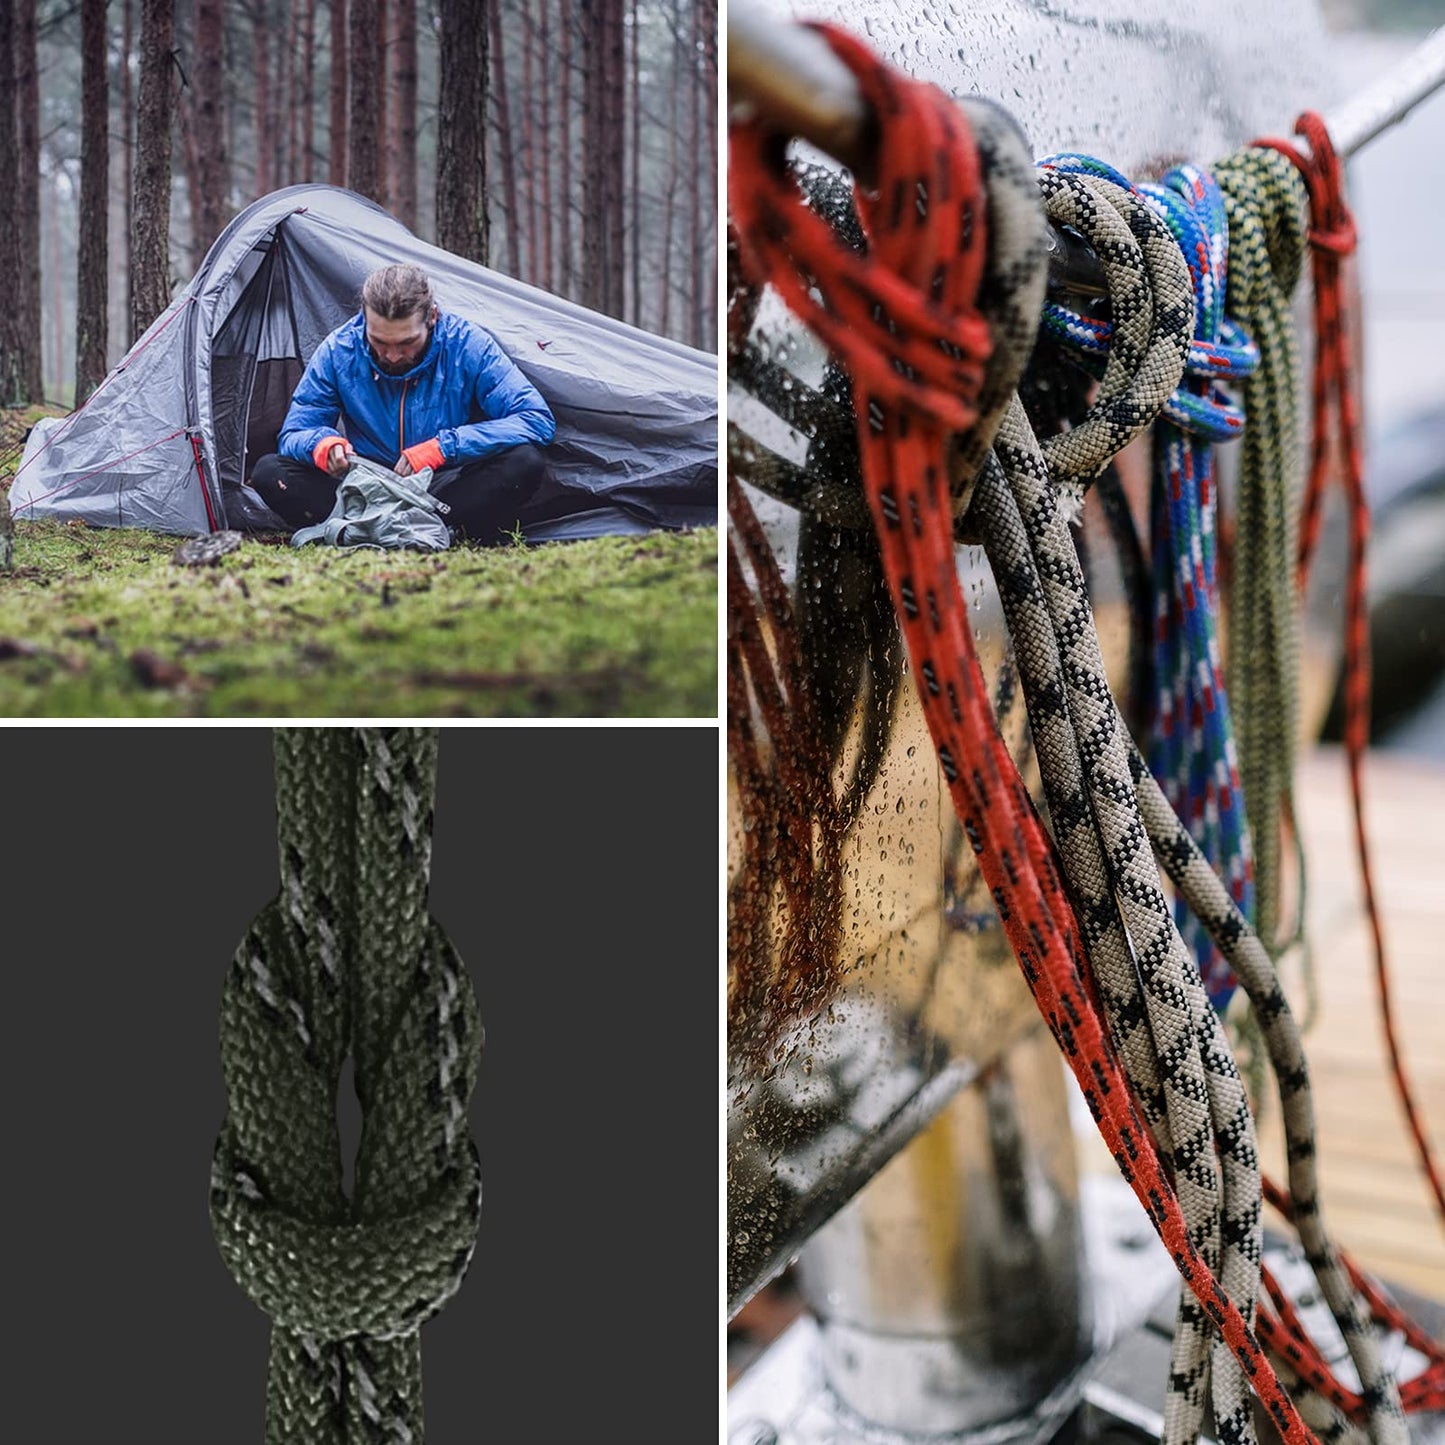 Balit Reflective 550 Paracord/Parachute Cord 4mm Tent Rope 7 Strands 65 Feet Reflect Nylon Pull Guy Lines Spool Wind Proof for Camping Outdoor Hiking Lanyard Bracelets Emergency